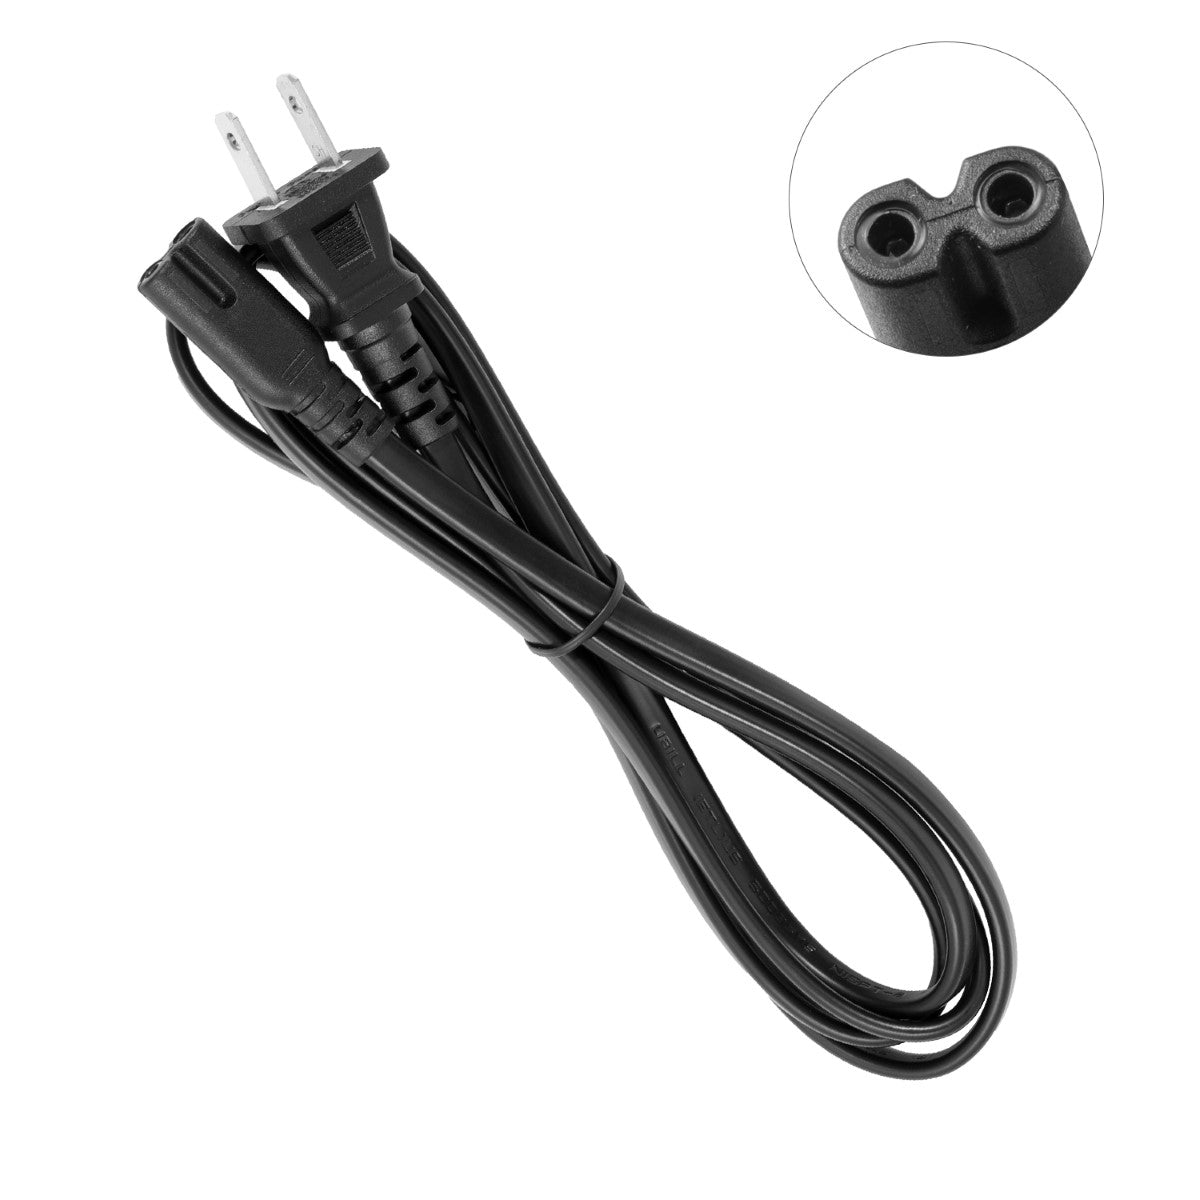 Power Cord for HP ENVY 7644 e-All-in-One Printer.